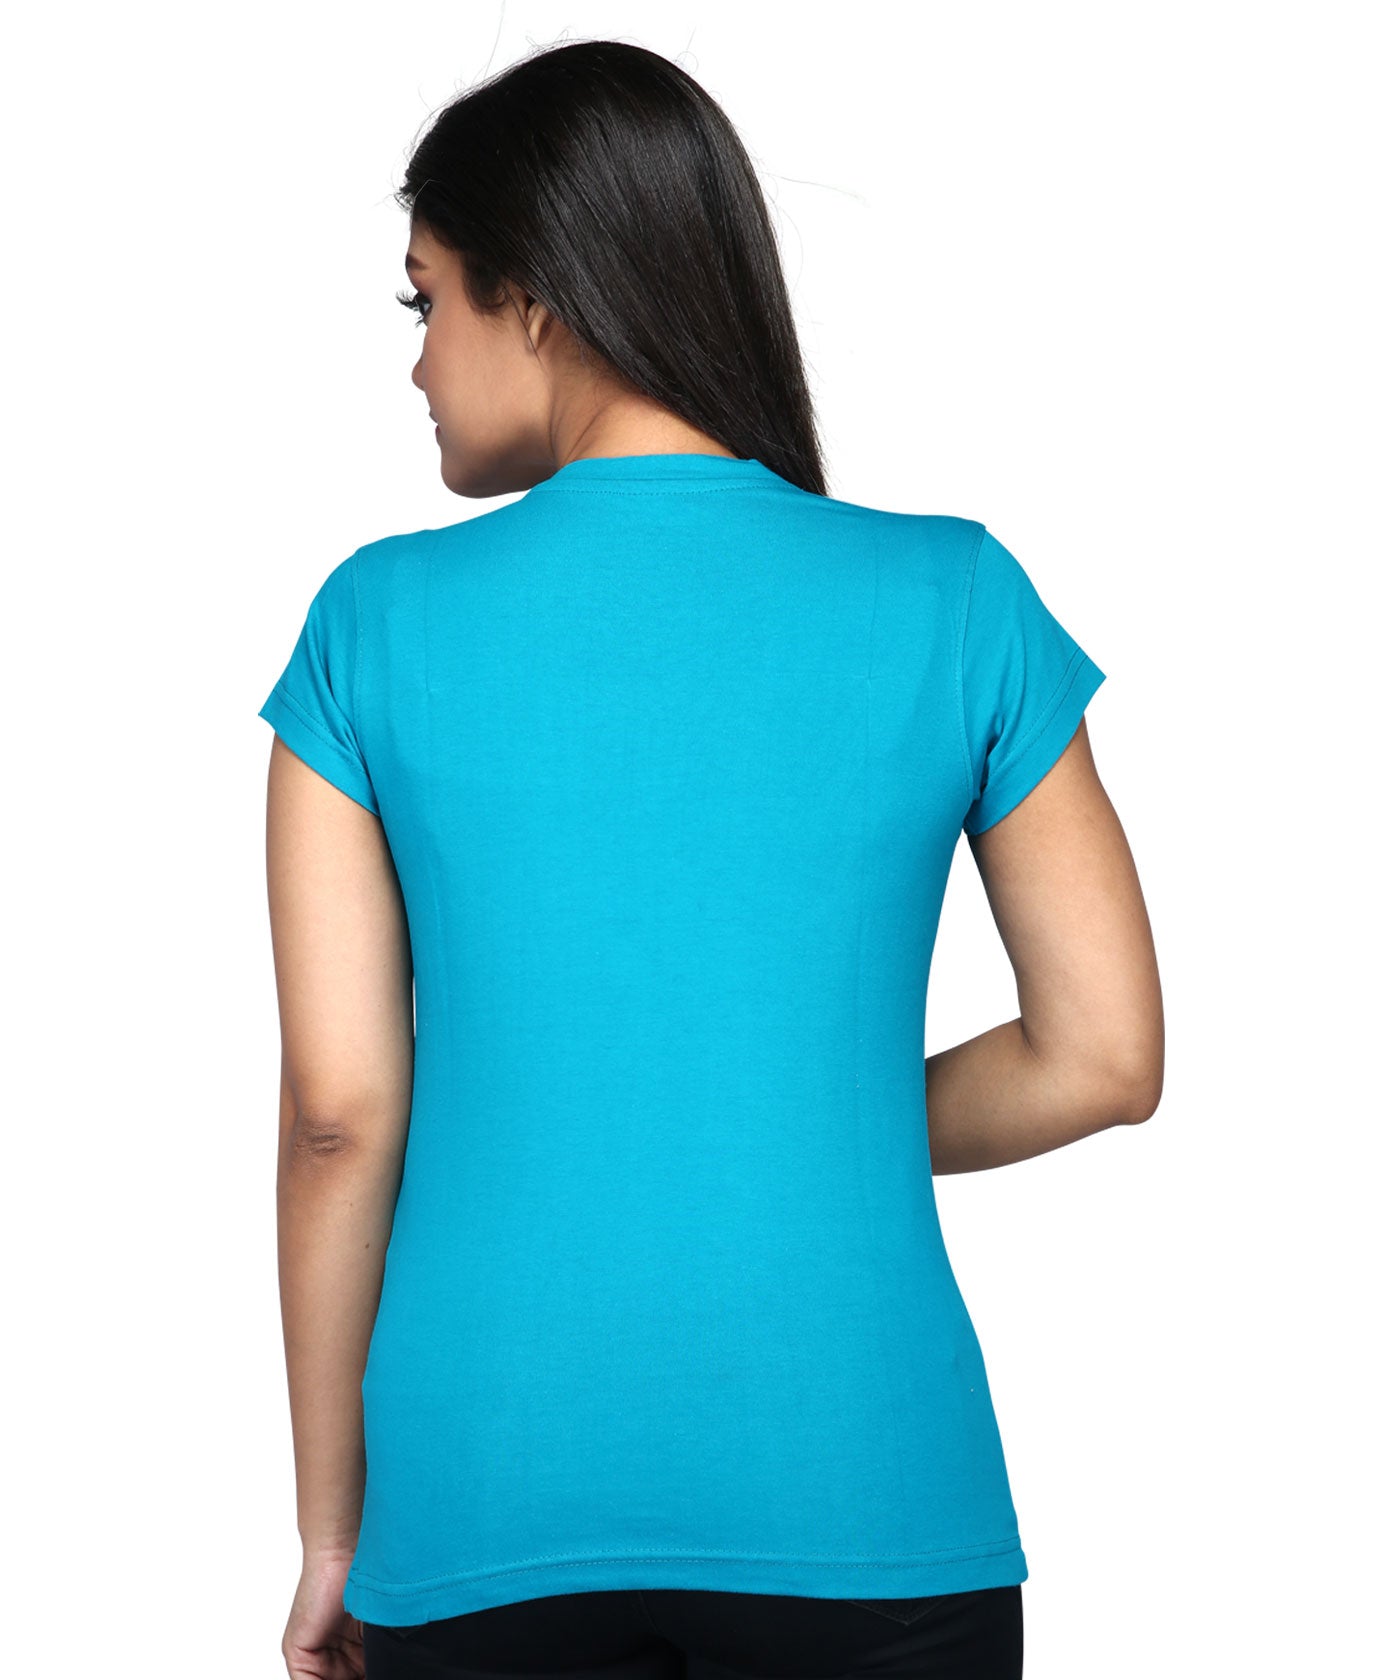 Not All Over - Block Print Tees for Women - Turquoise